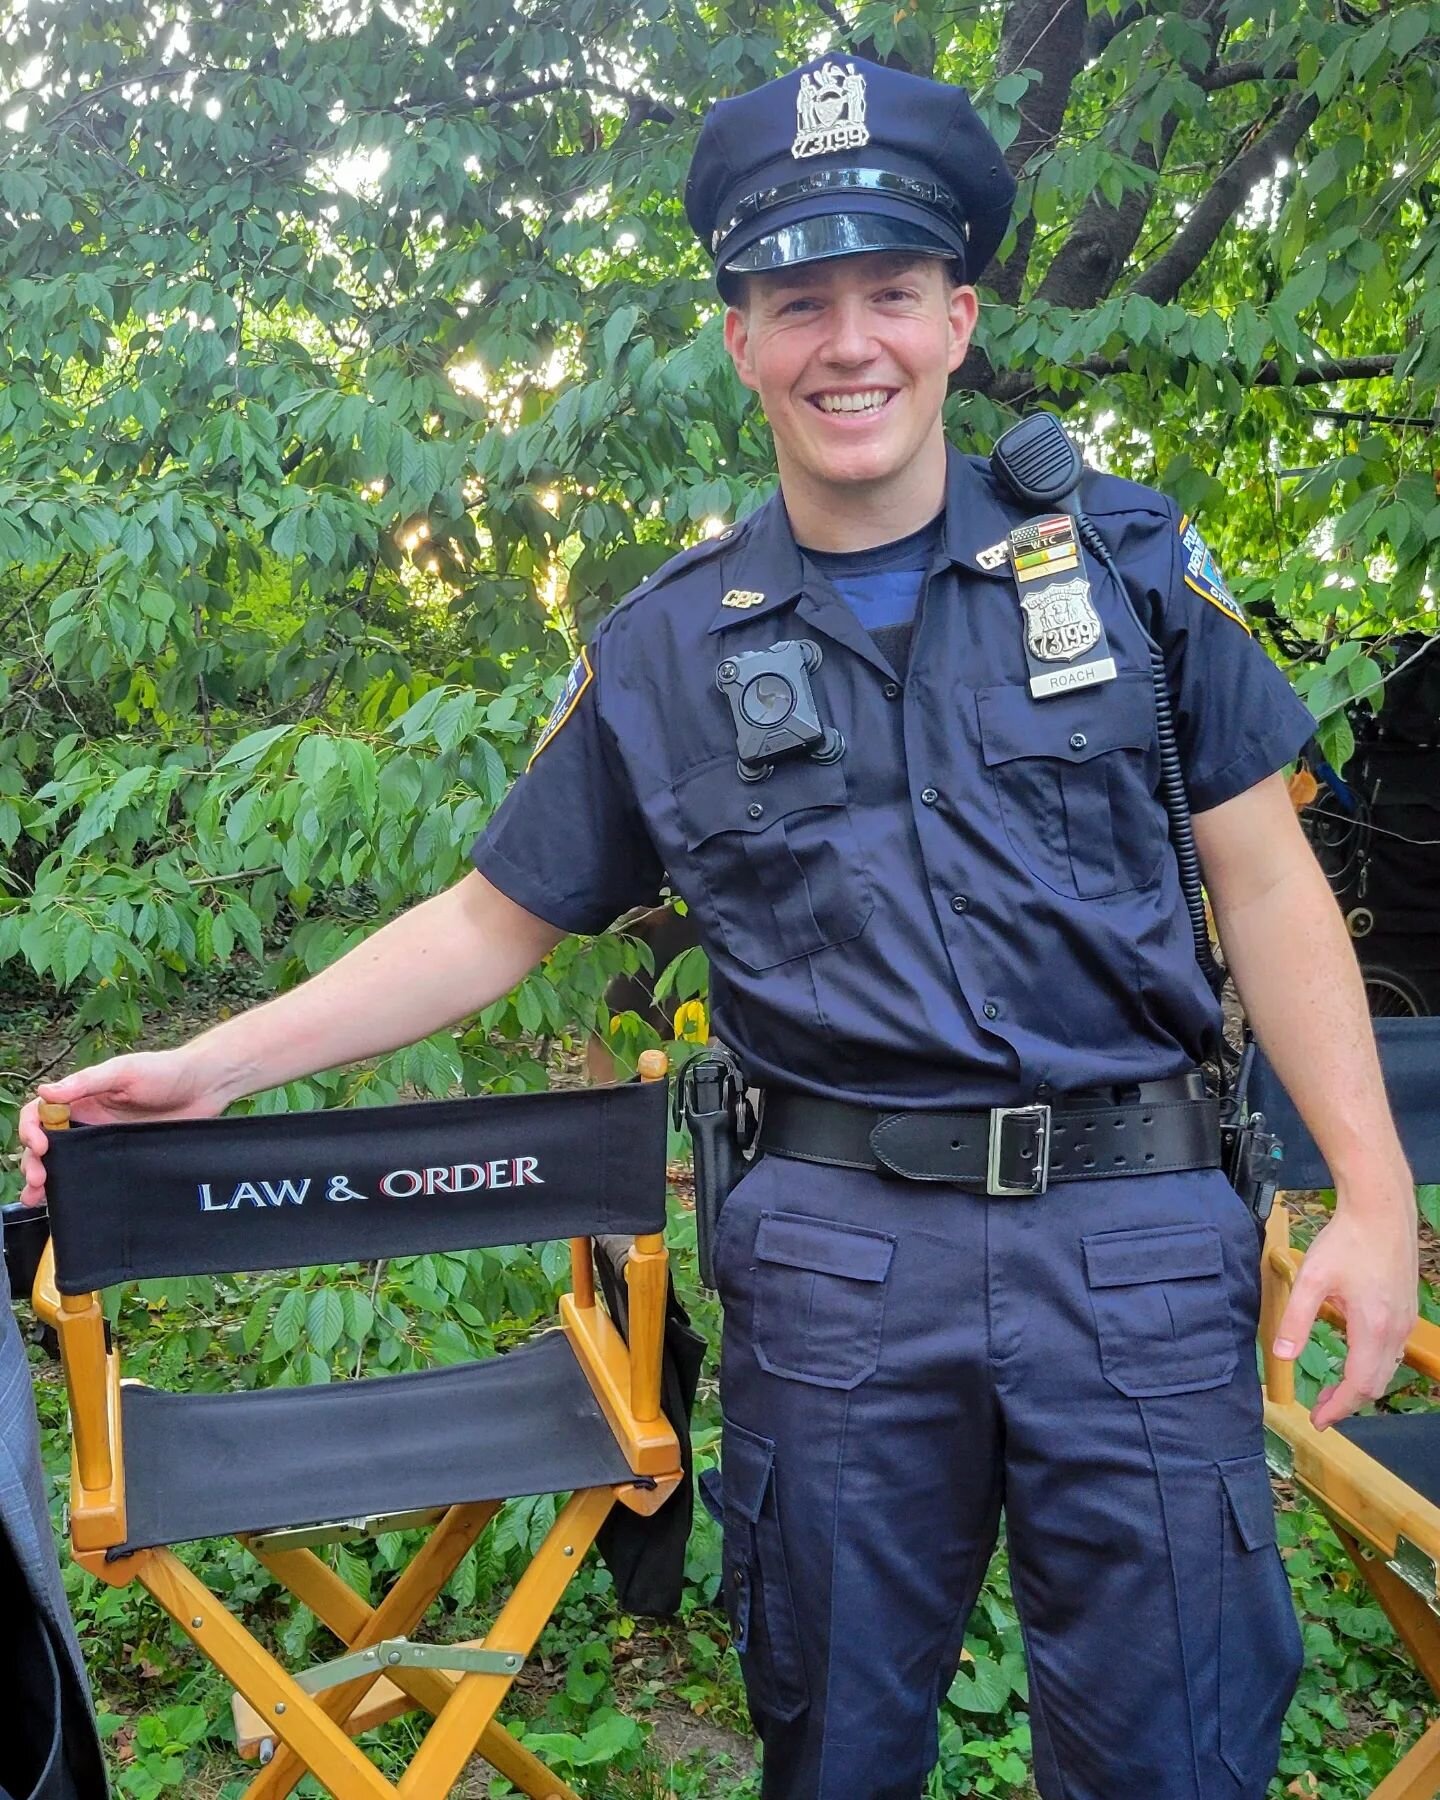 Law &amp; Order Behind the Scenes 🎬
Had to get a picture with the chair! 👮&zwj;♂️